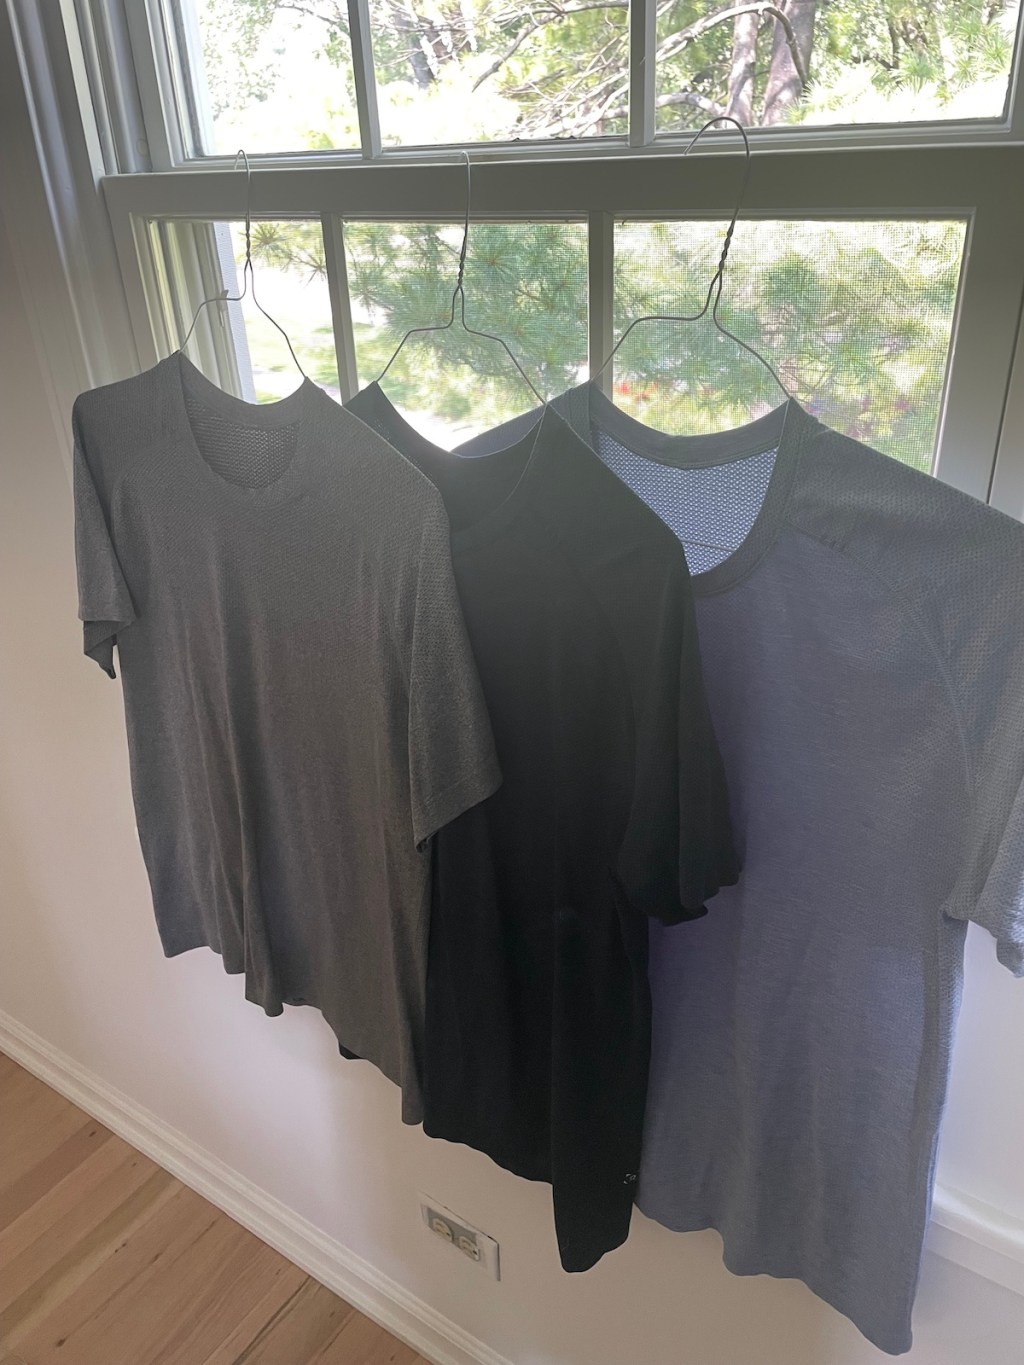 black and gray lululemon tshirts hanging from window on wire hangers